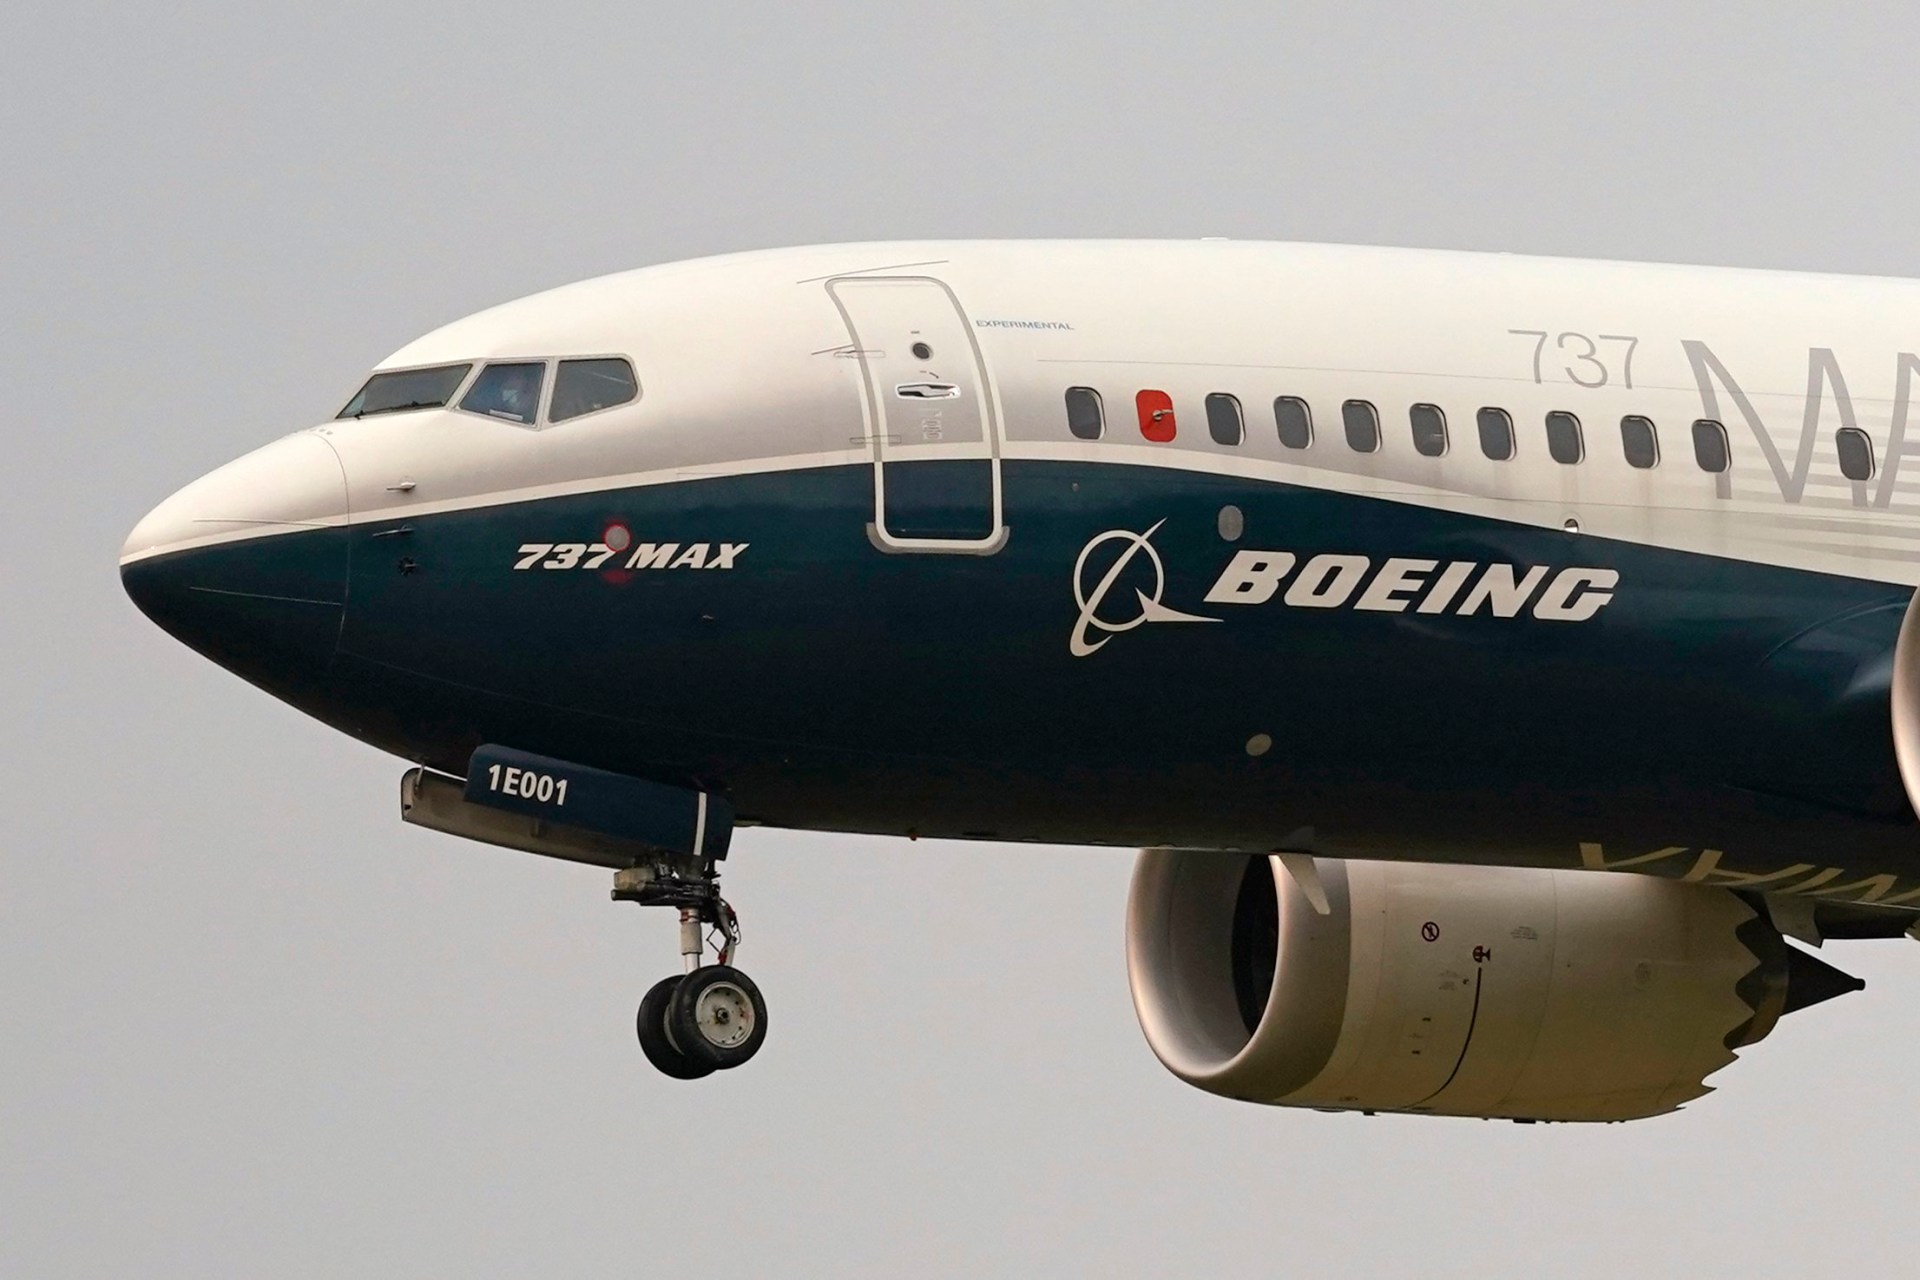 boeing whistleblower says he would not fly on 737 max plane after defect claims